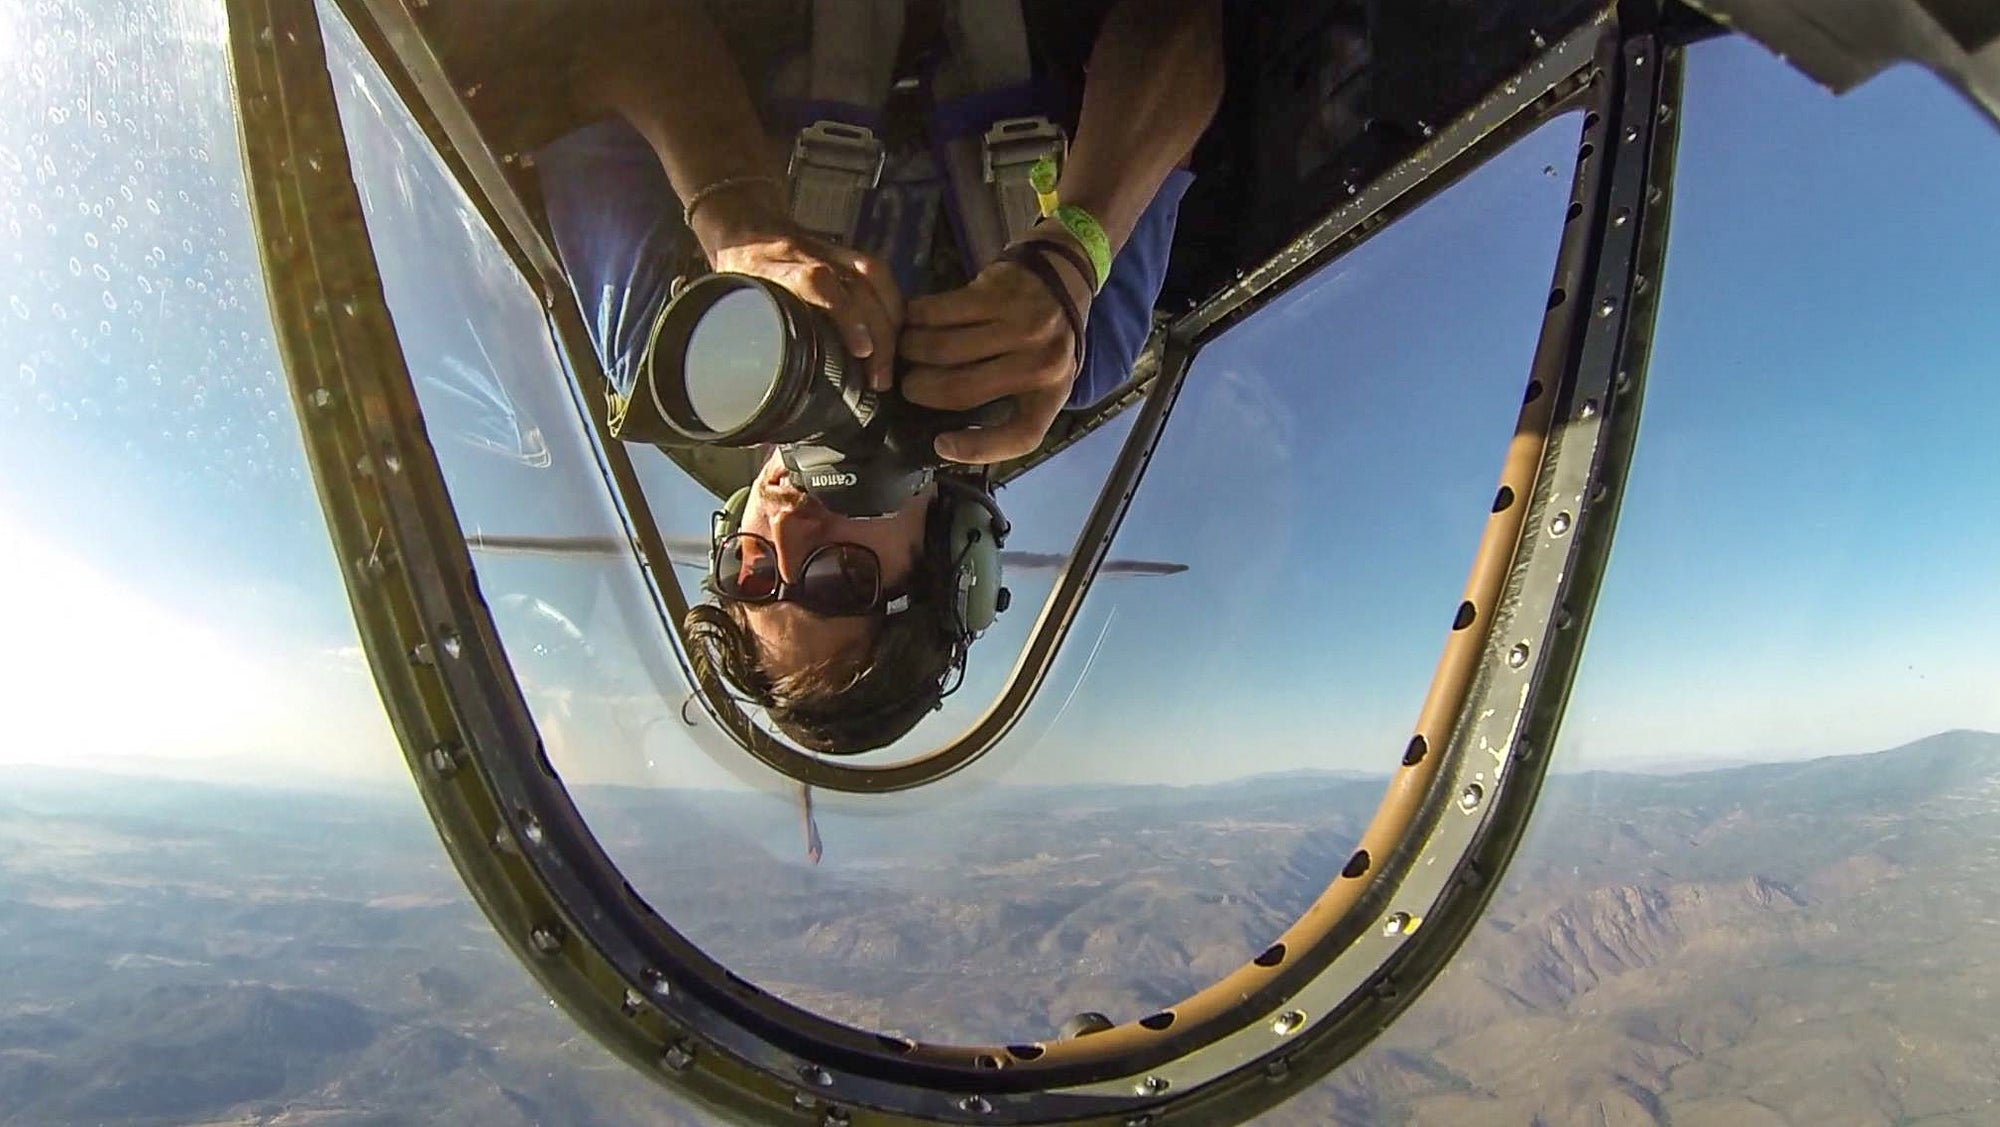 A photographer goes inverted in an airplane high above the Nevada desert.